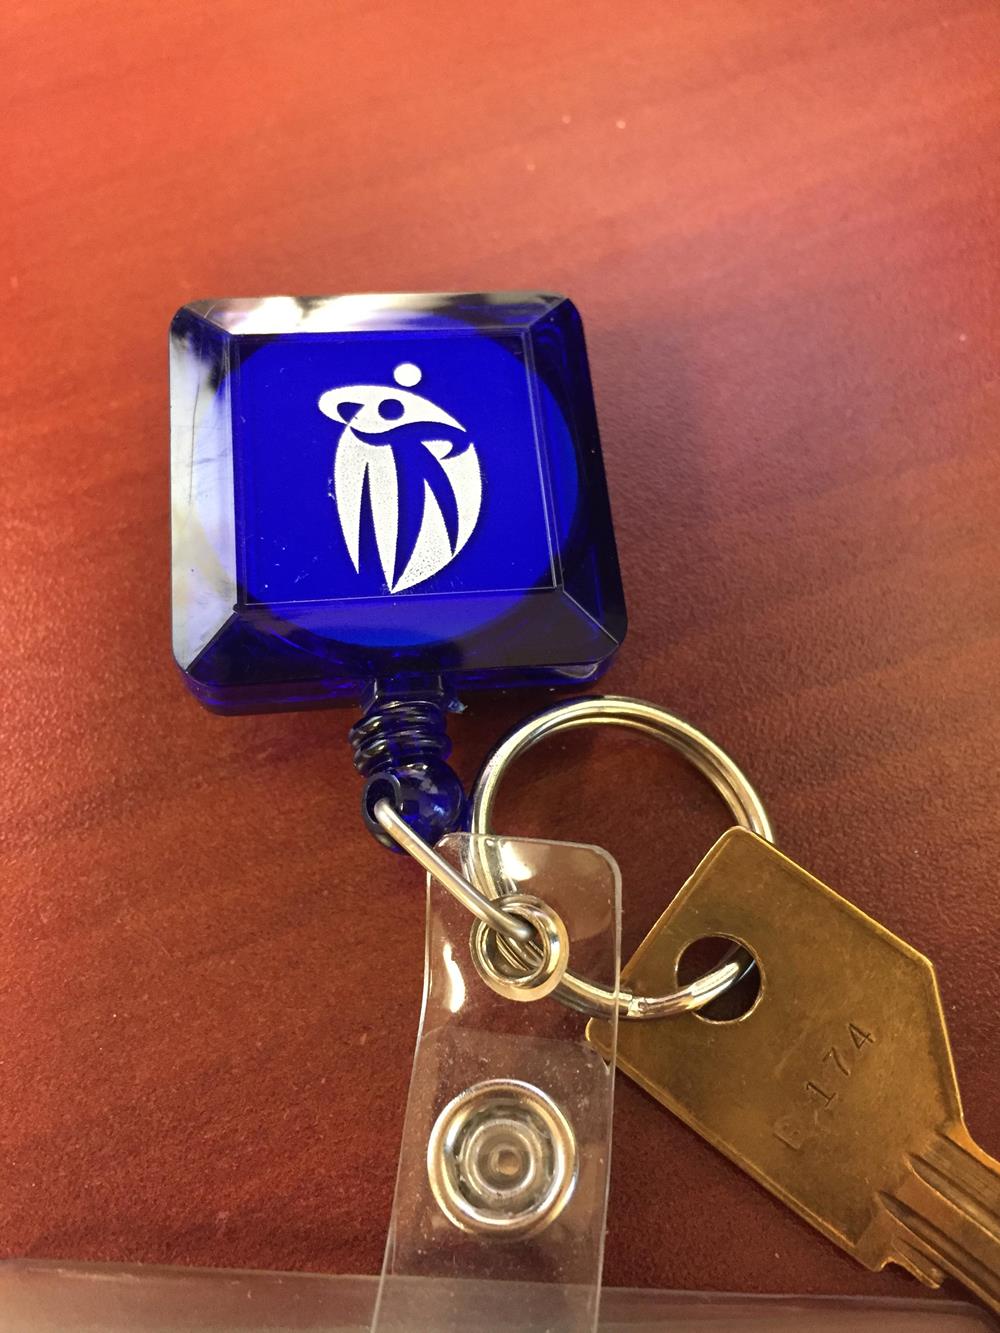 a key chain with a blue square with a white logo on it